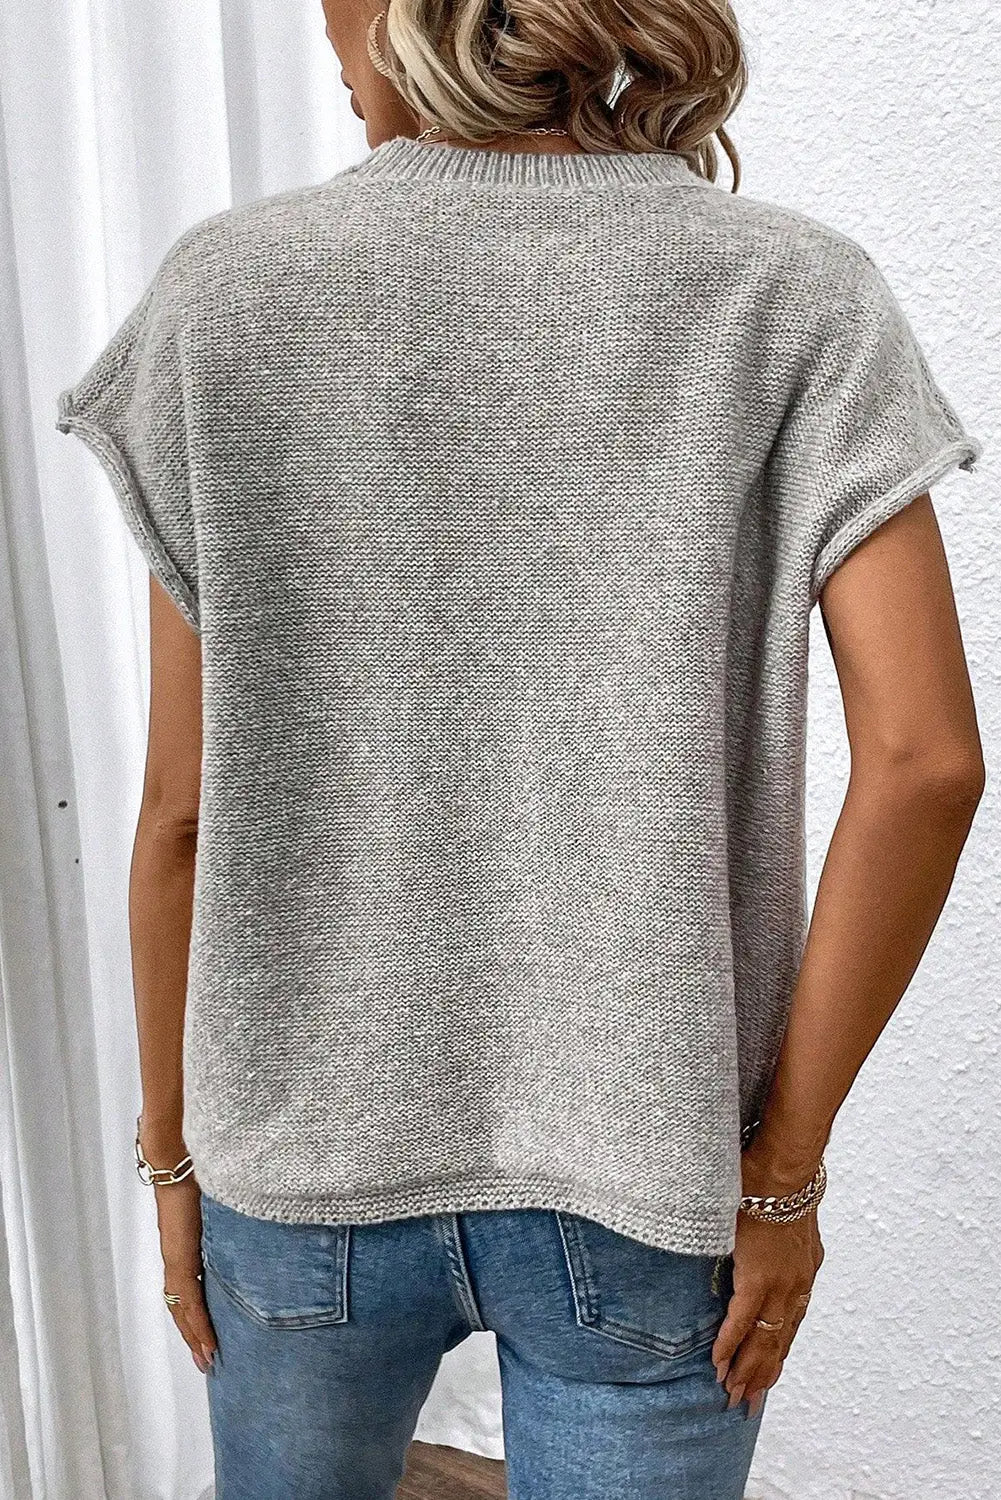 Gray crew neck center seamed short sleeve sweater - sweaters & cardigans